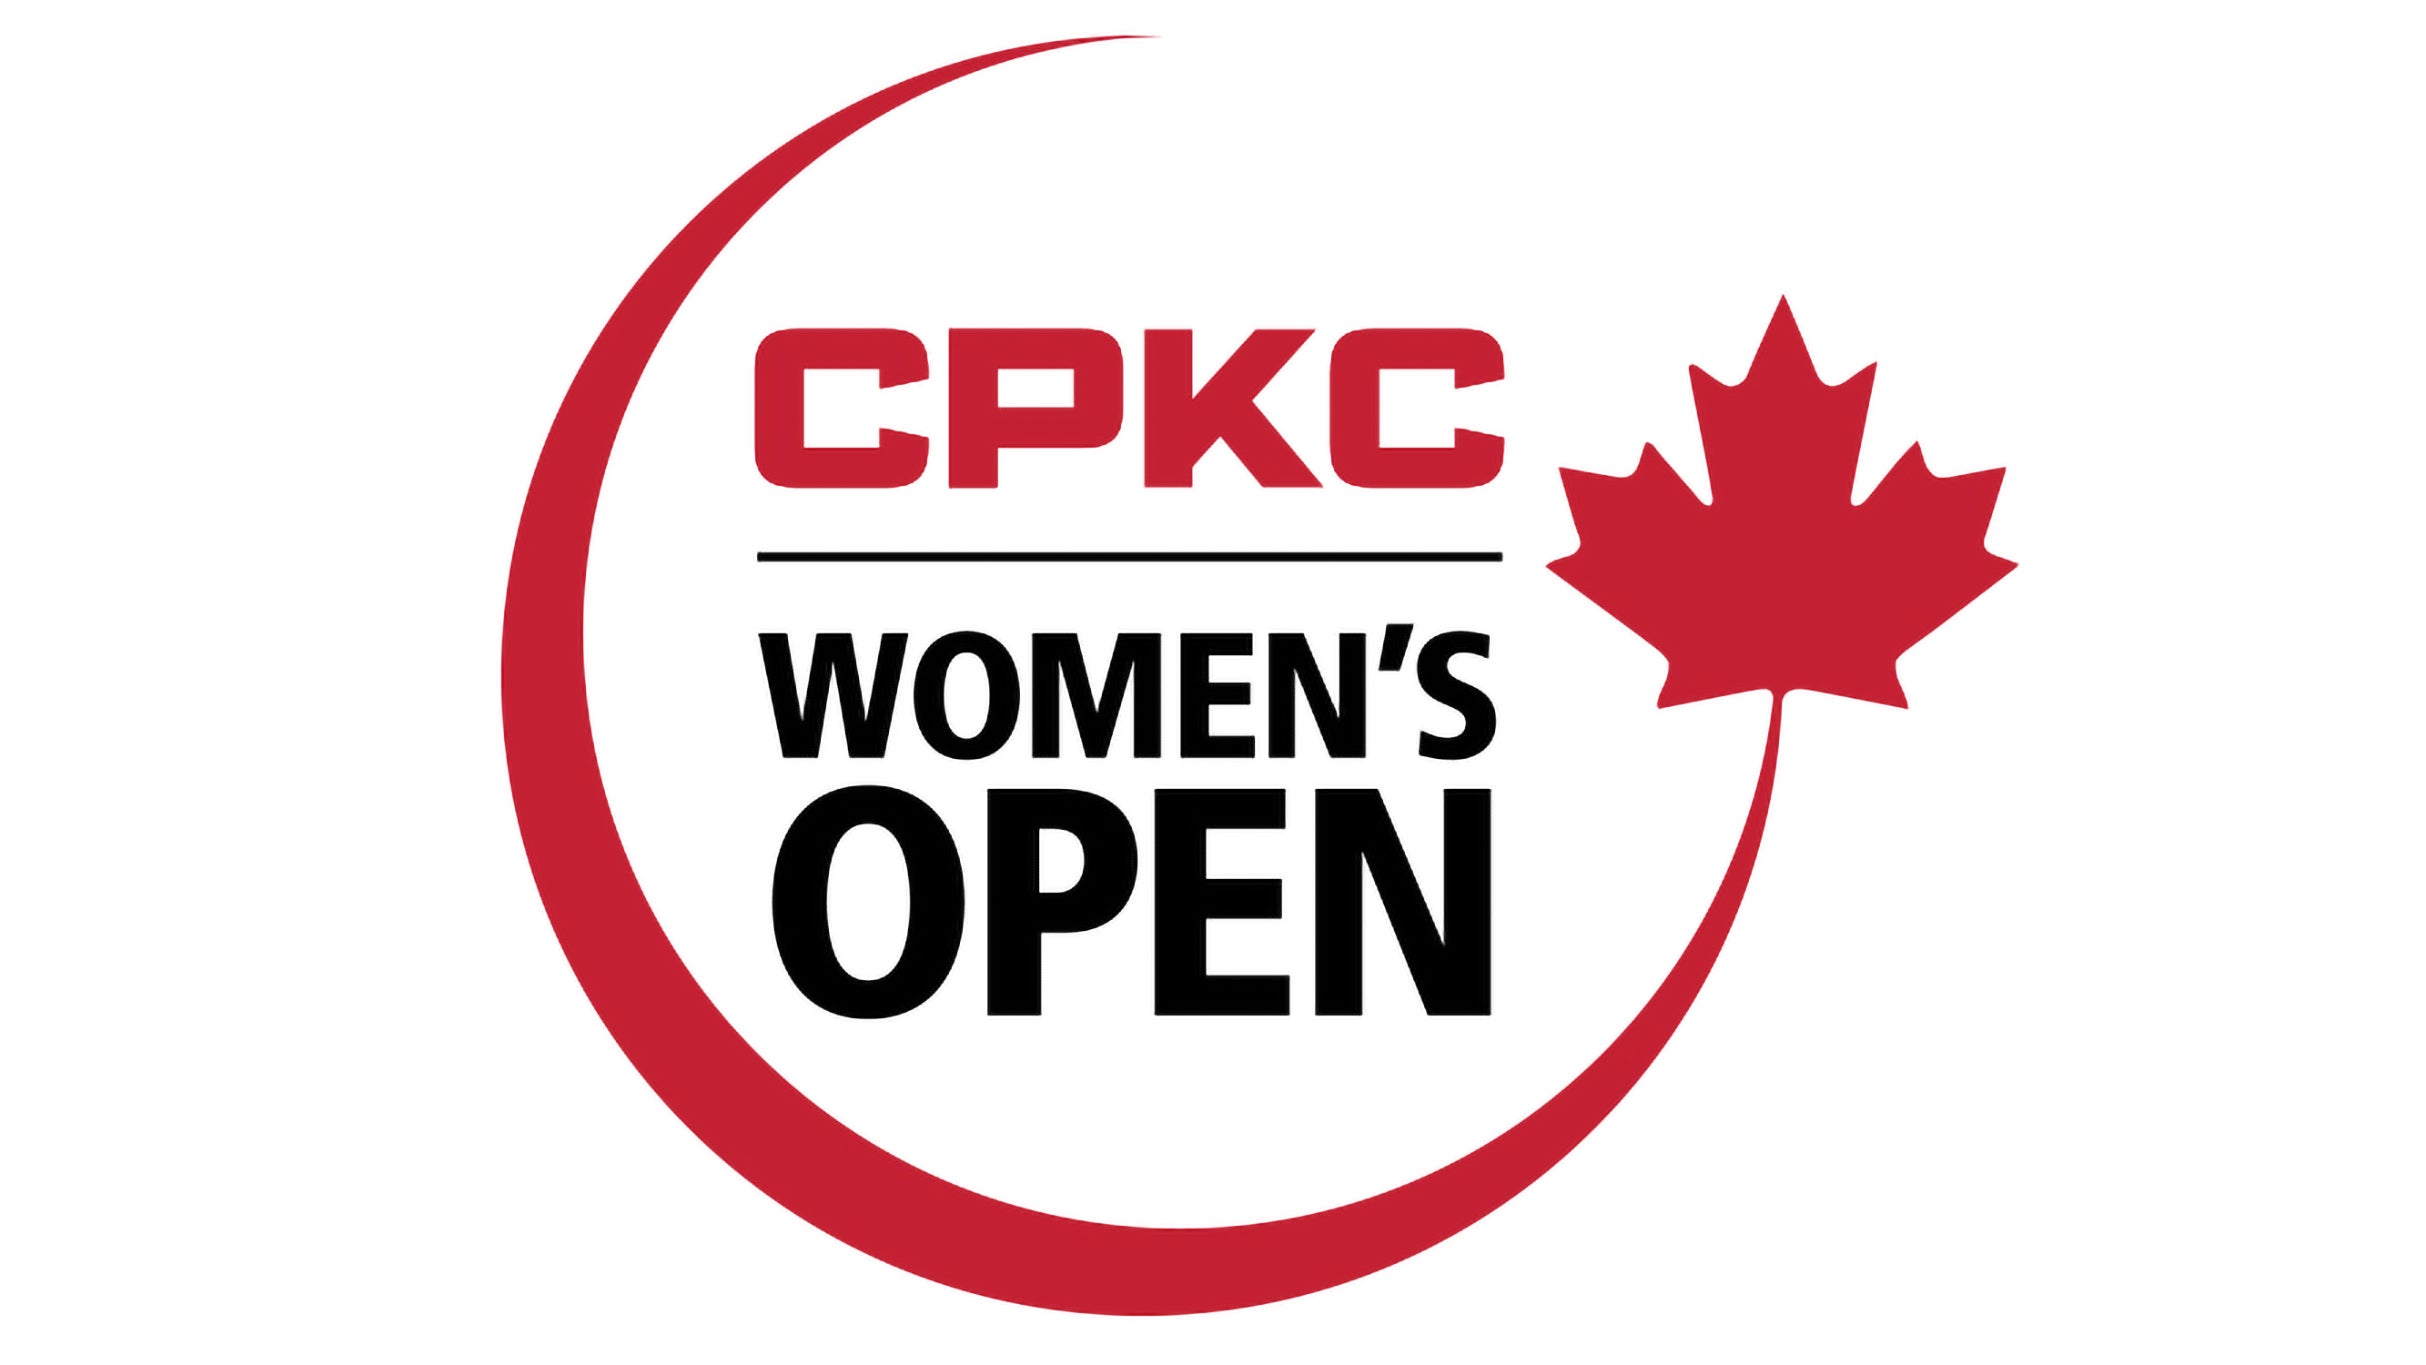 CPKC Women's Open Friday Ticket in Calgary promo photo for Golf Future presale offer code